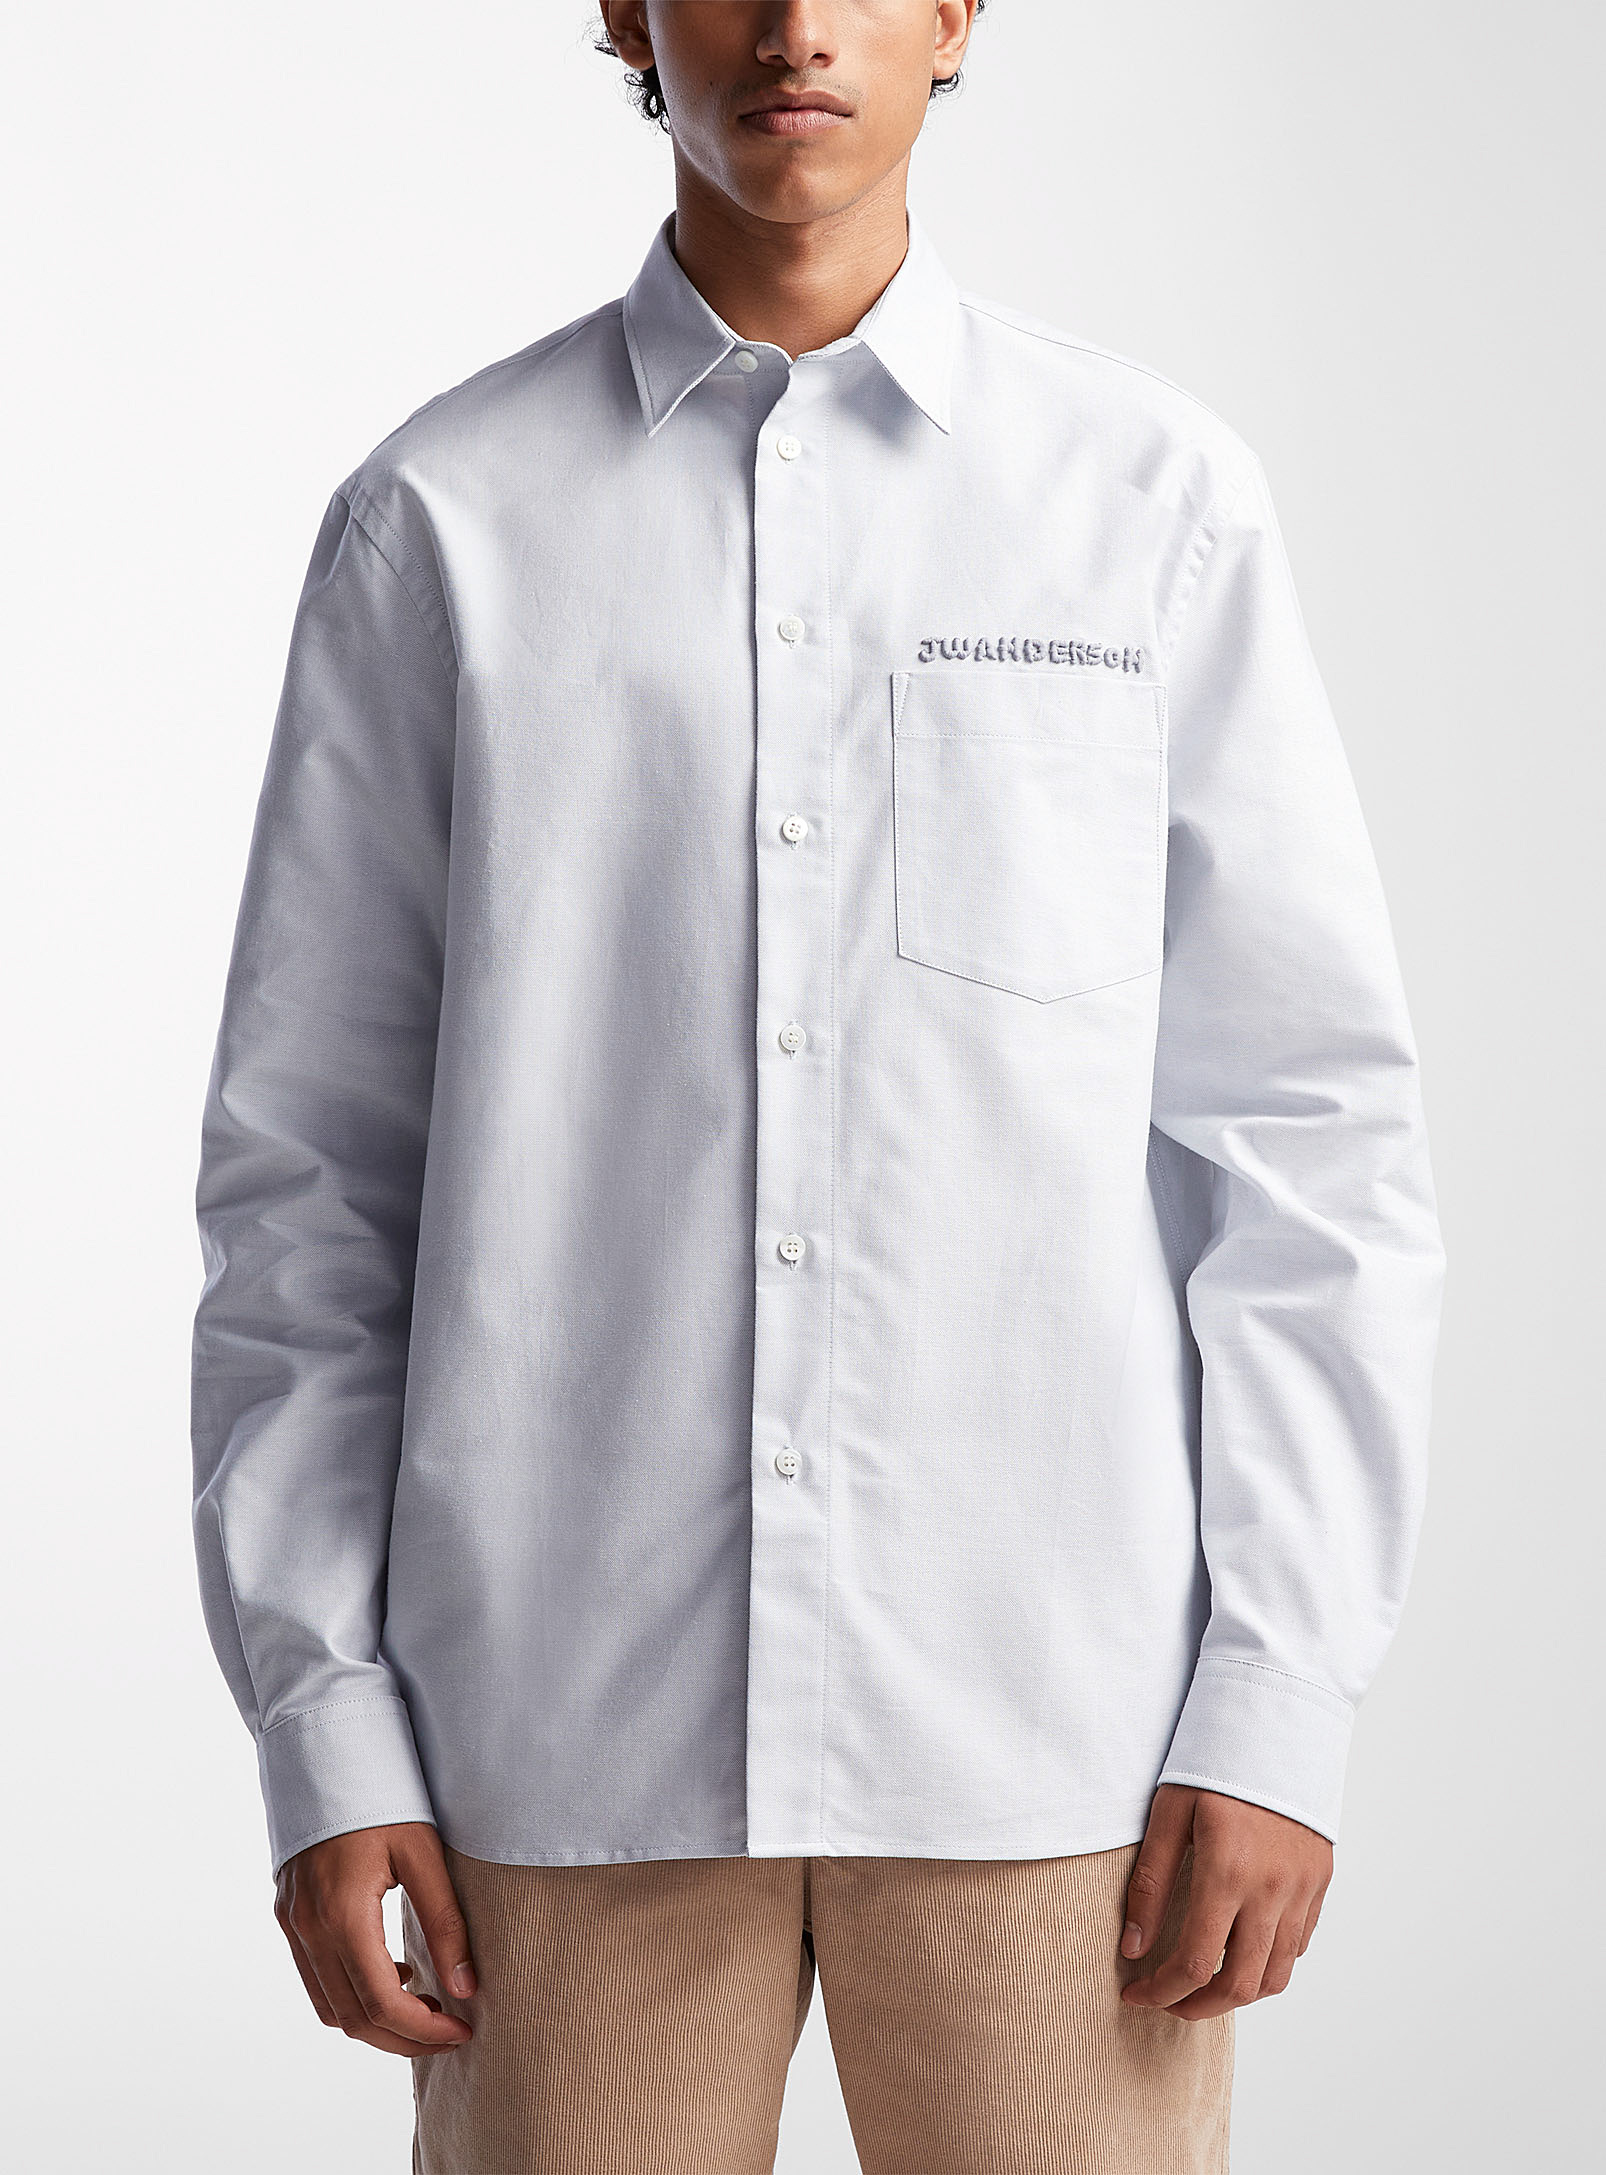 JW Anderson - Men's Embroidered signature Oxford shirt